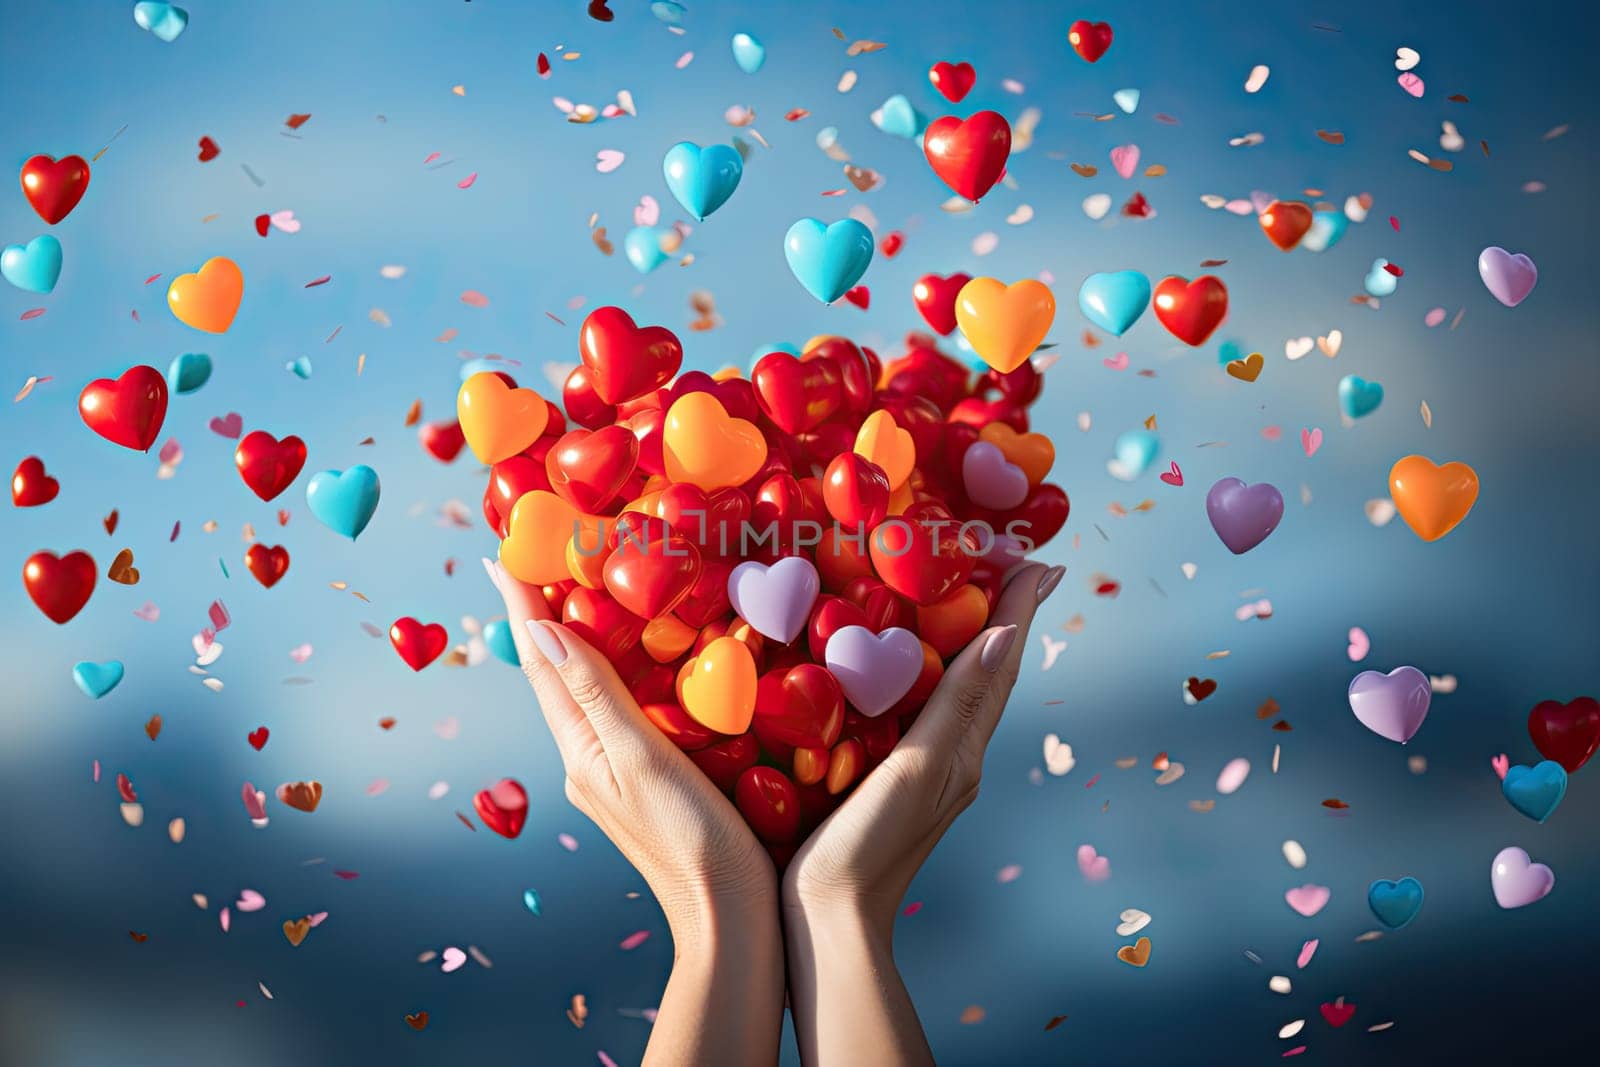 two hands holding up a heart shaped filled with hearts by golibtolibov